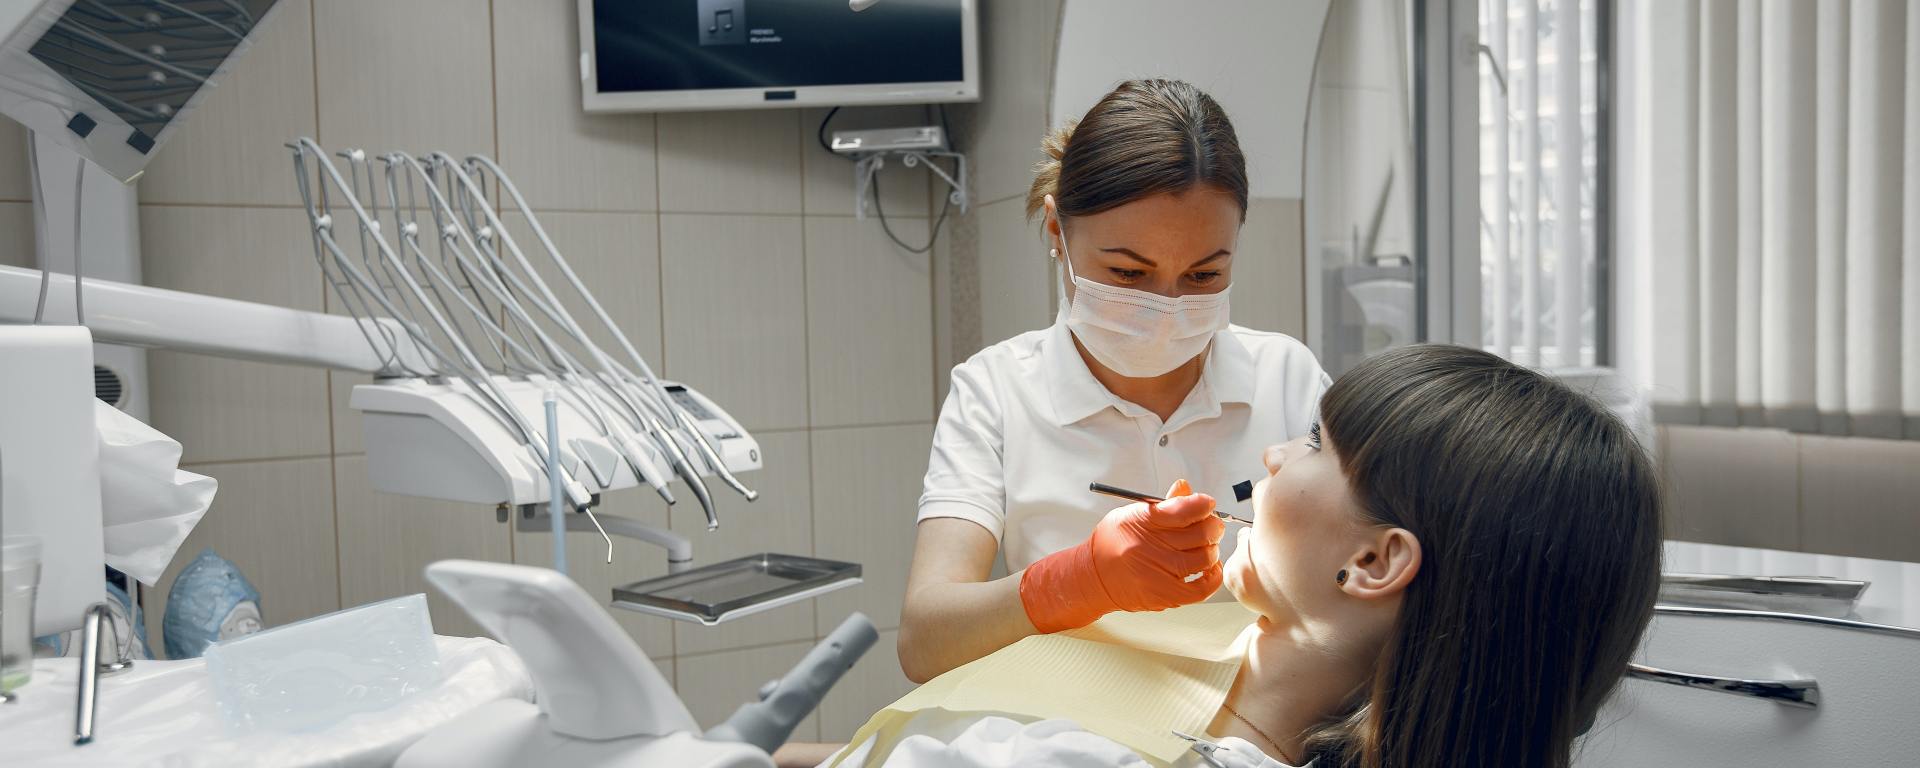 woman in dentists chair with dentist using dental apparatus in her mouth